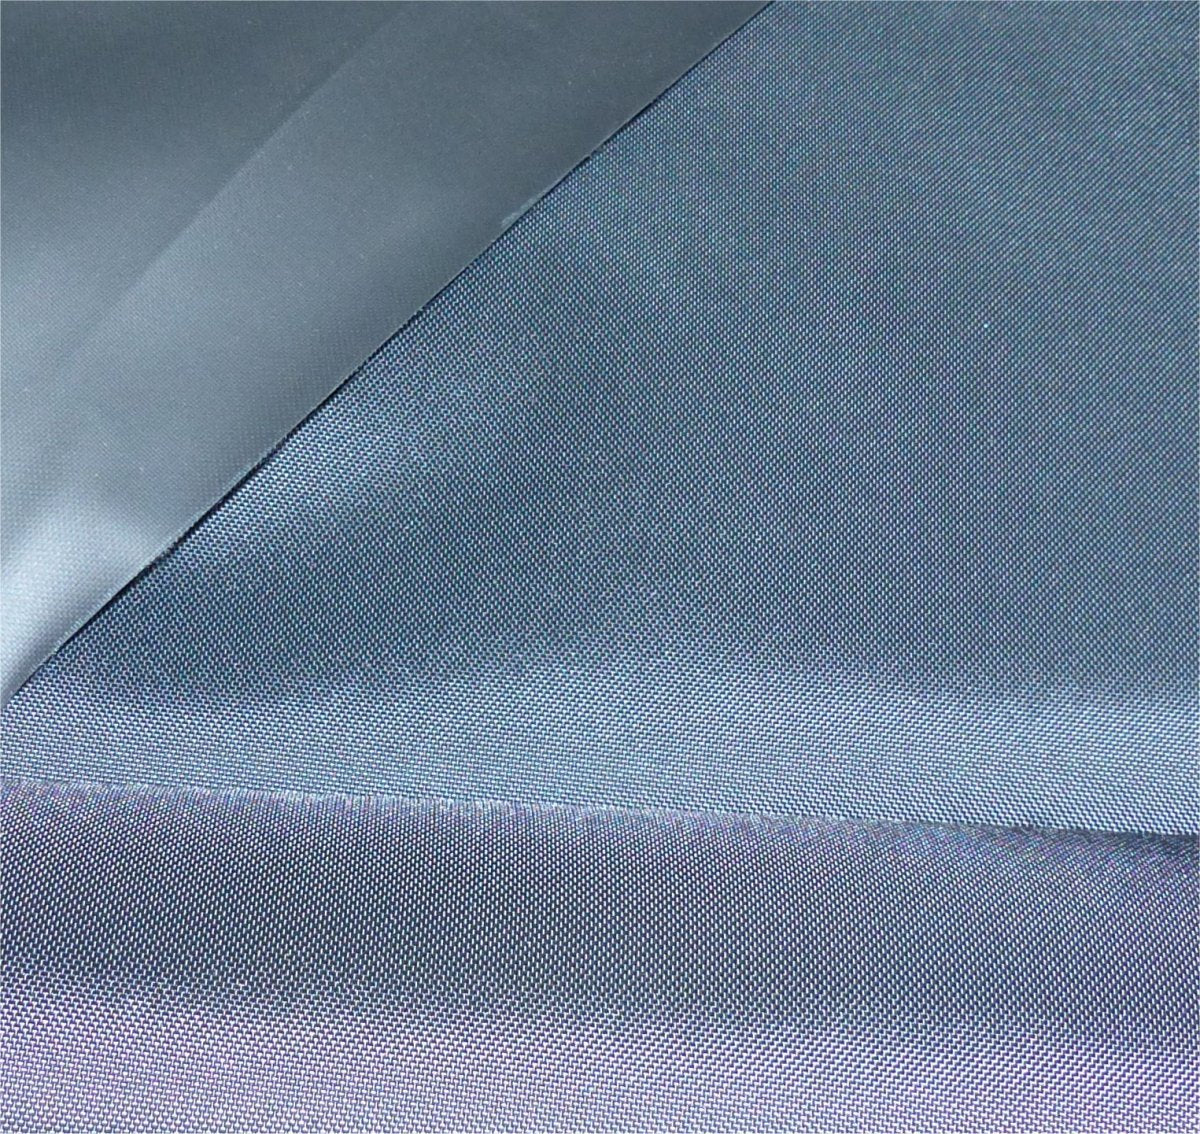 Waterproof PVC Fabric for Tarpaulins and Covers